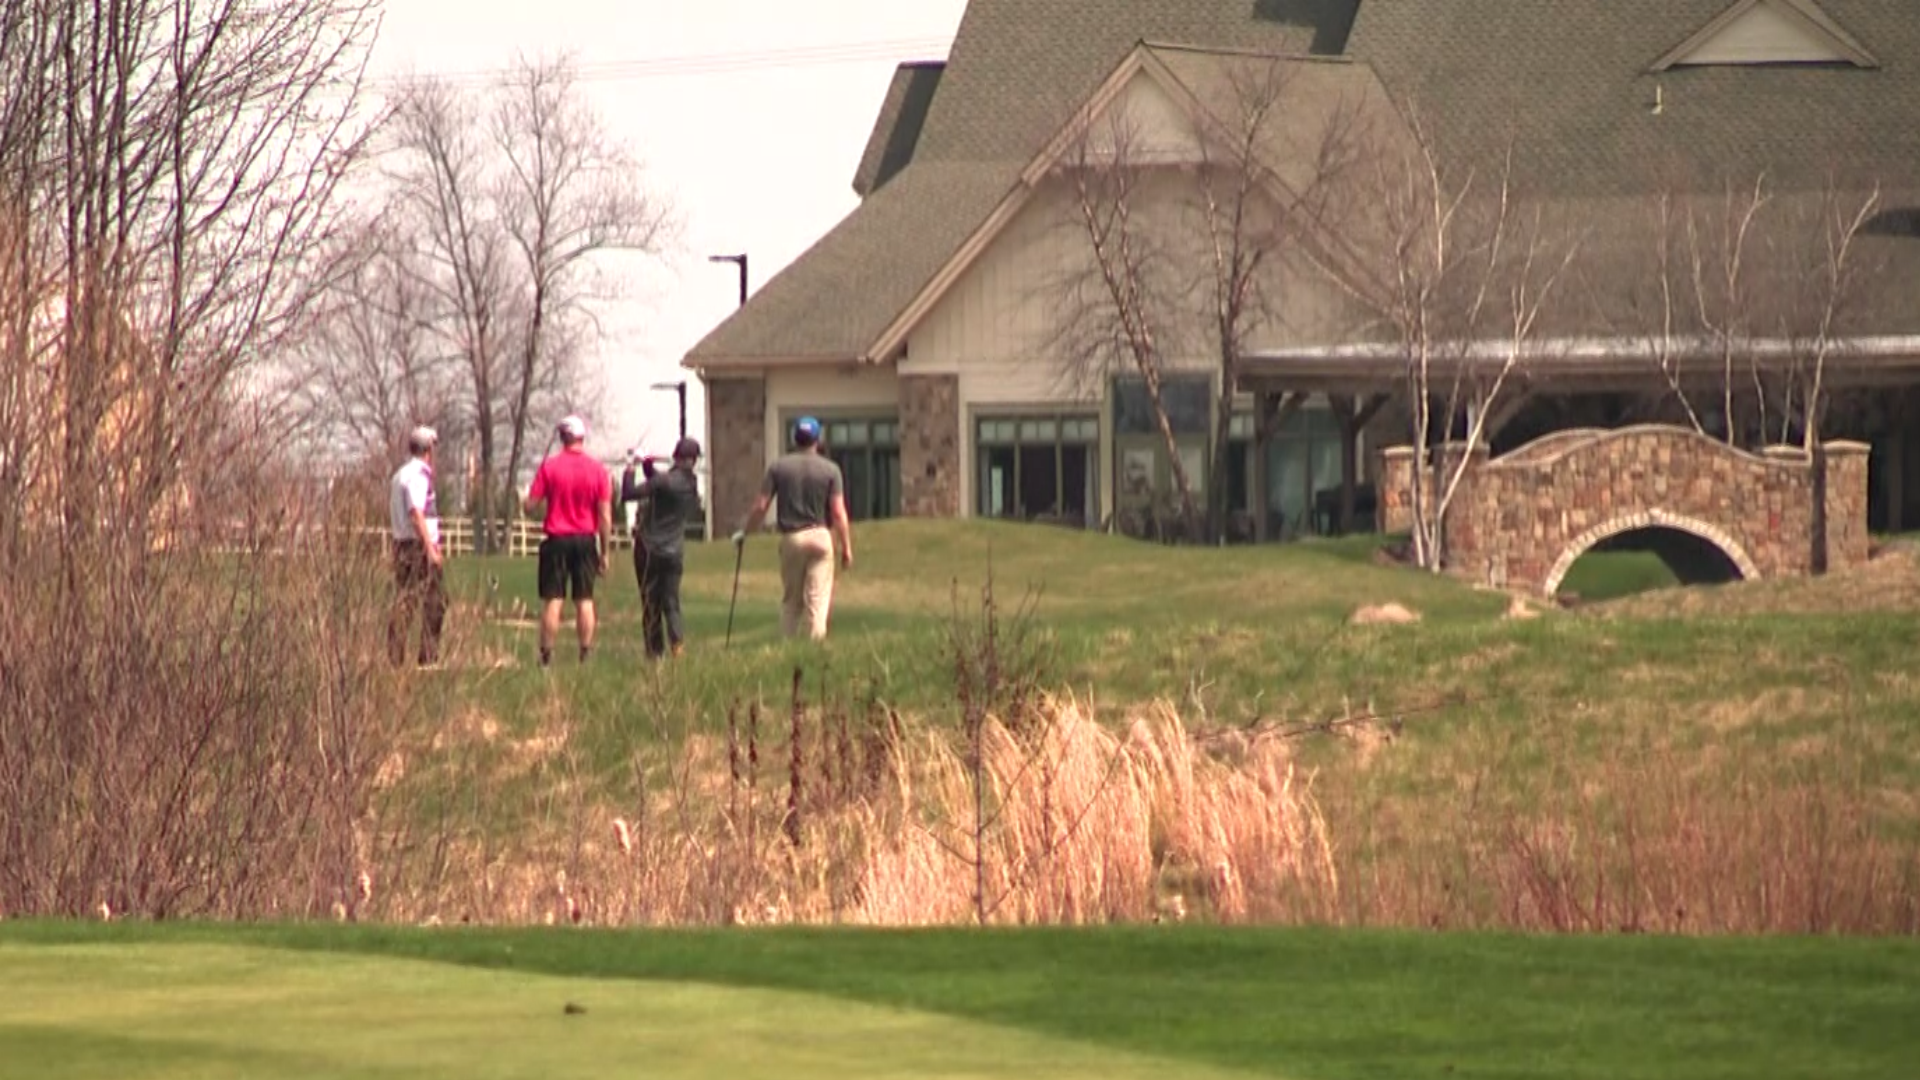 While the state has made it clear that golf courses cannot be open for business, private clubs are still allowing members to walk the greens.